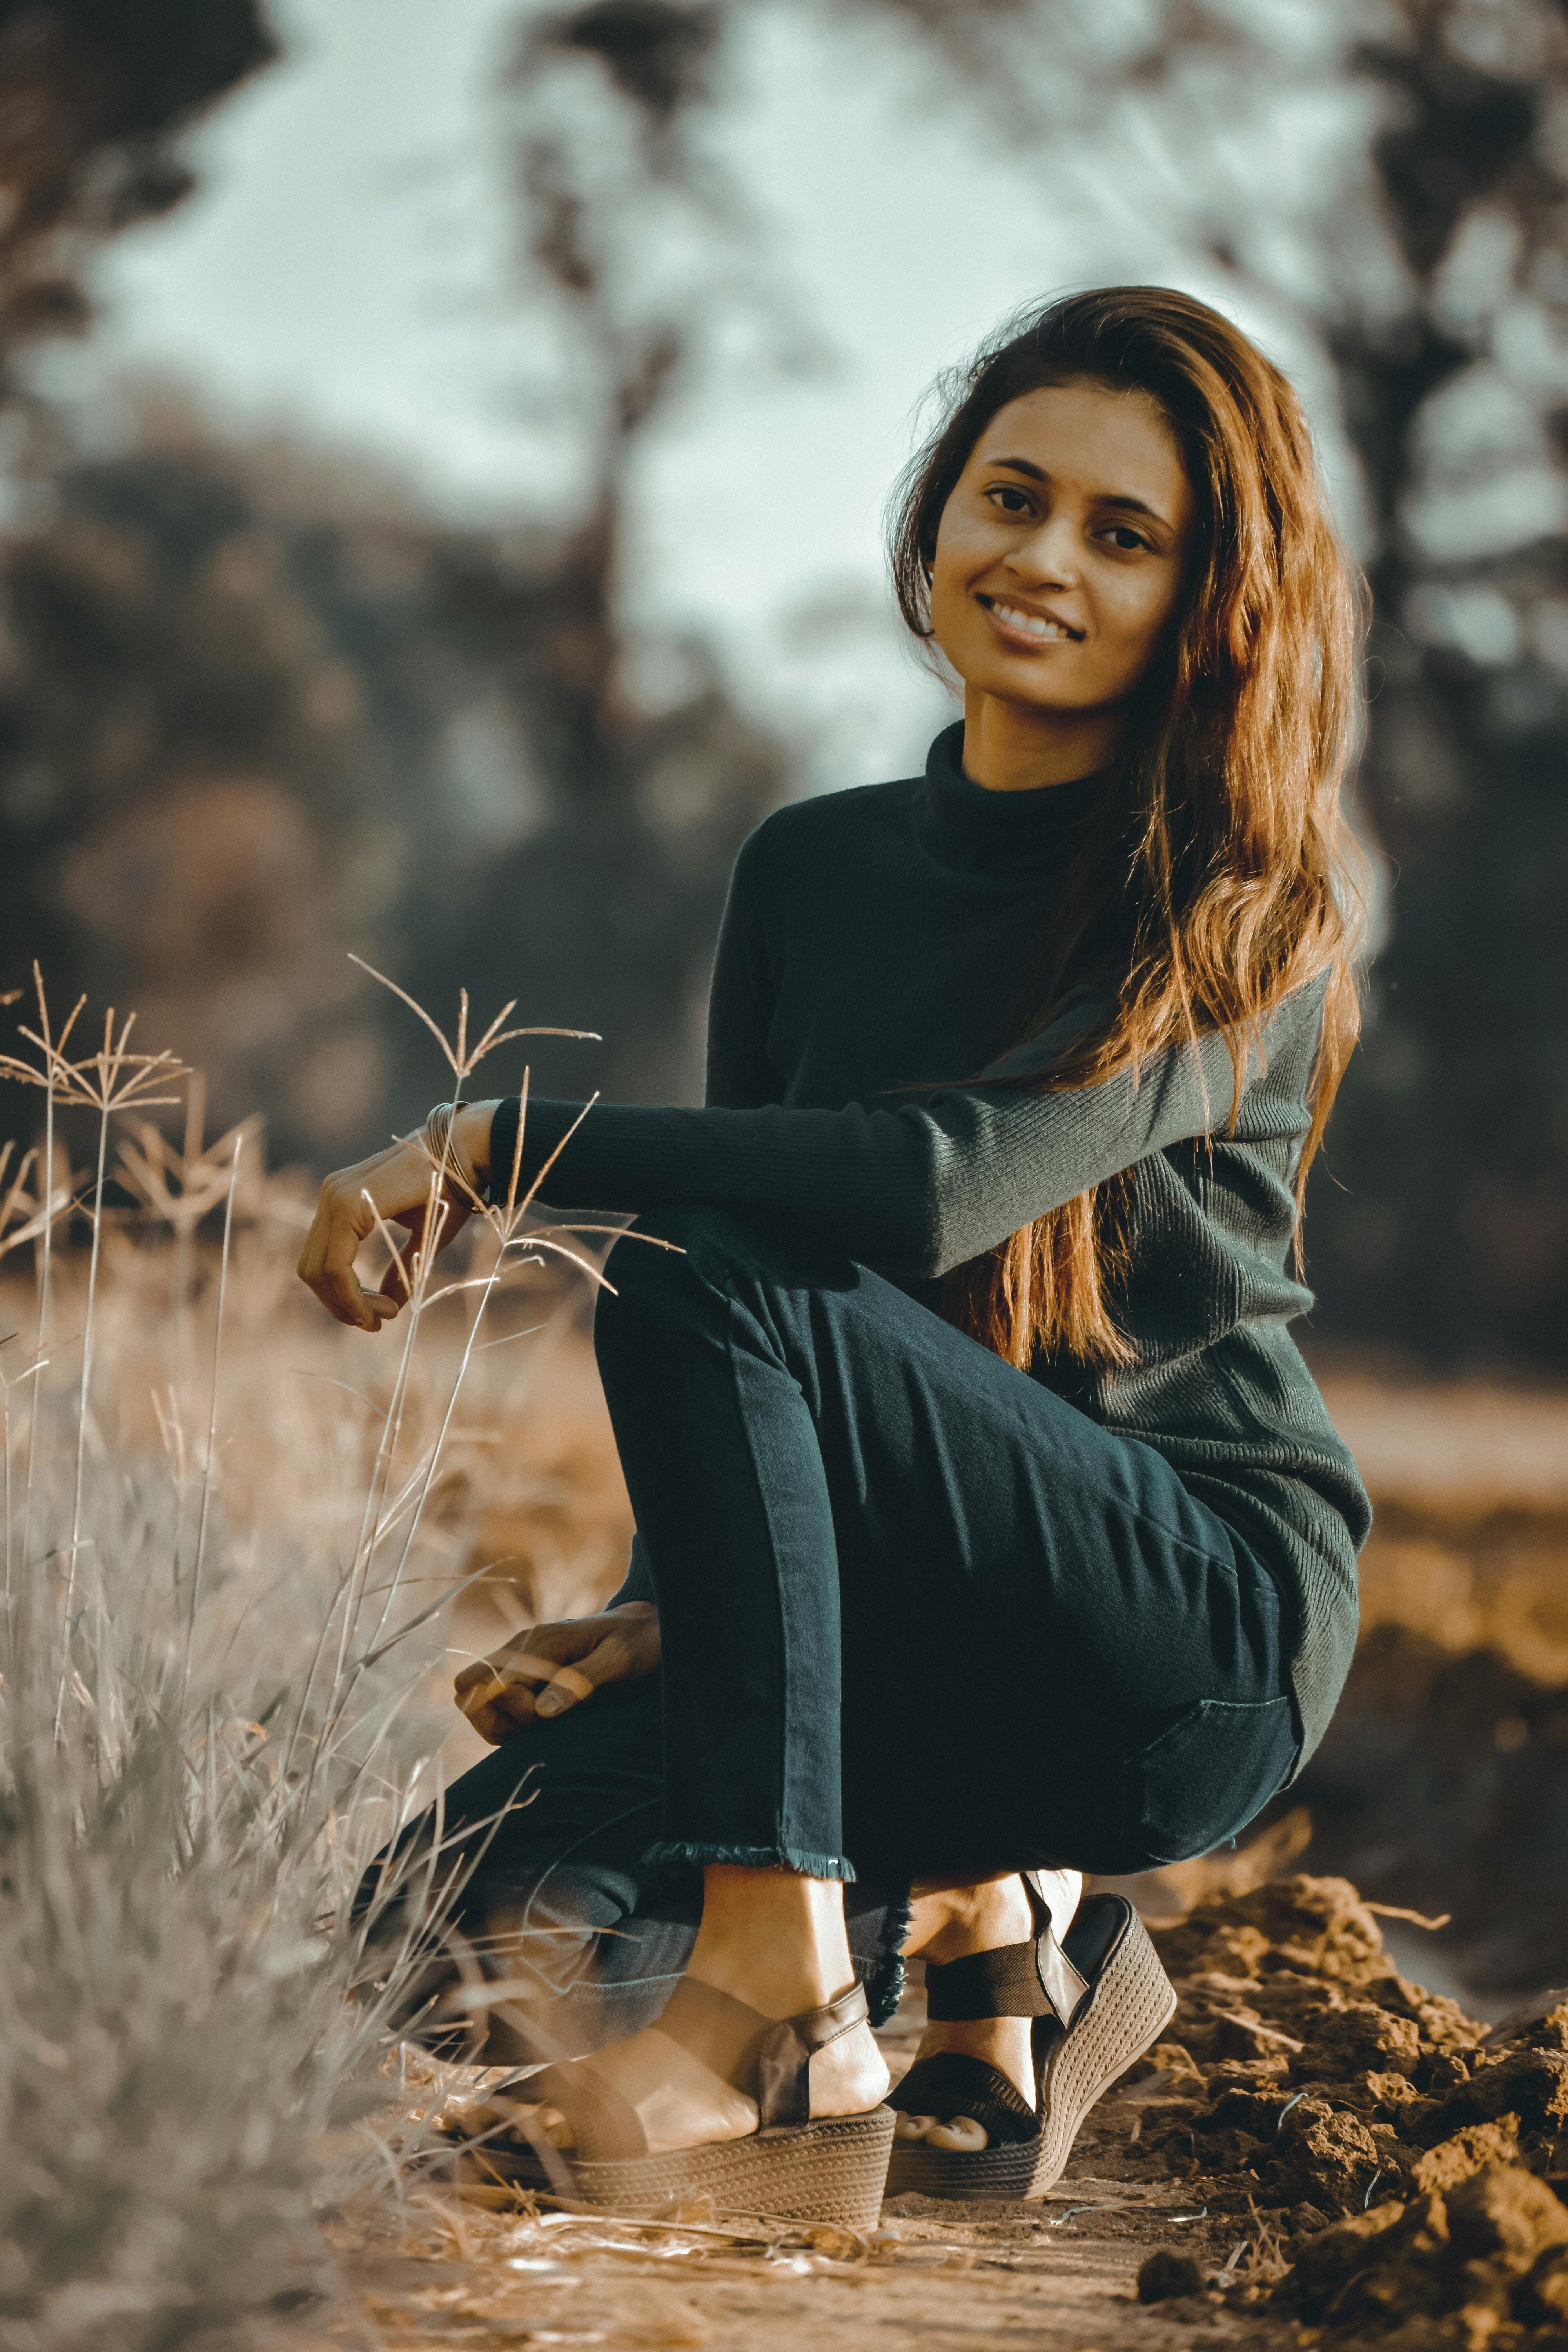 Free Images : nature, forest, person, girl, woman, model, spring, green,  park, fashion, clothing, lady, long hair, dress, photograph, beauty,  beautiful, story, gown, models, abdomen, photo shoot, brown hair, portrait  photography 3388x5082 - -